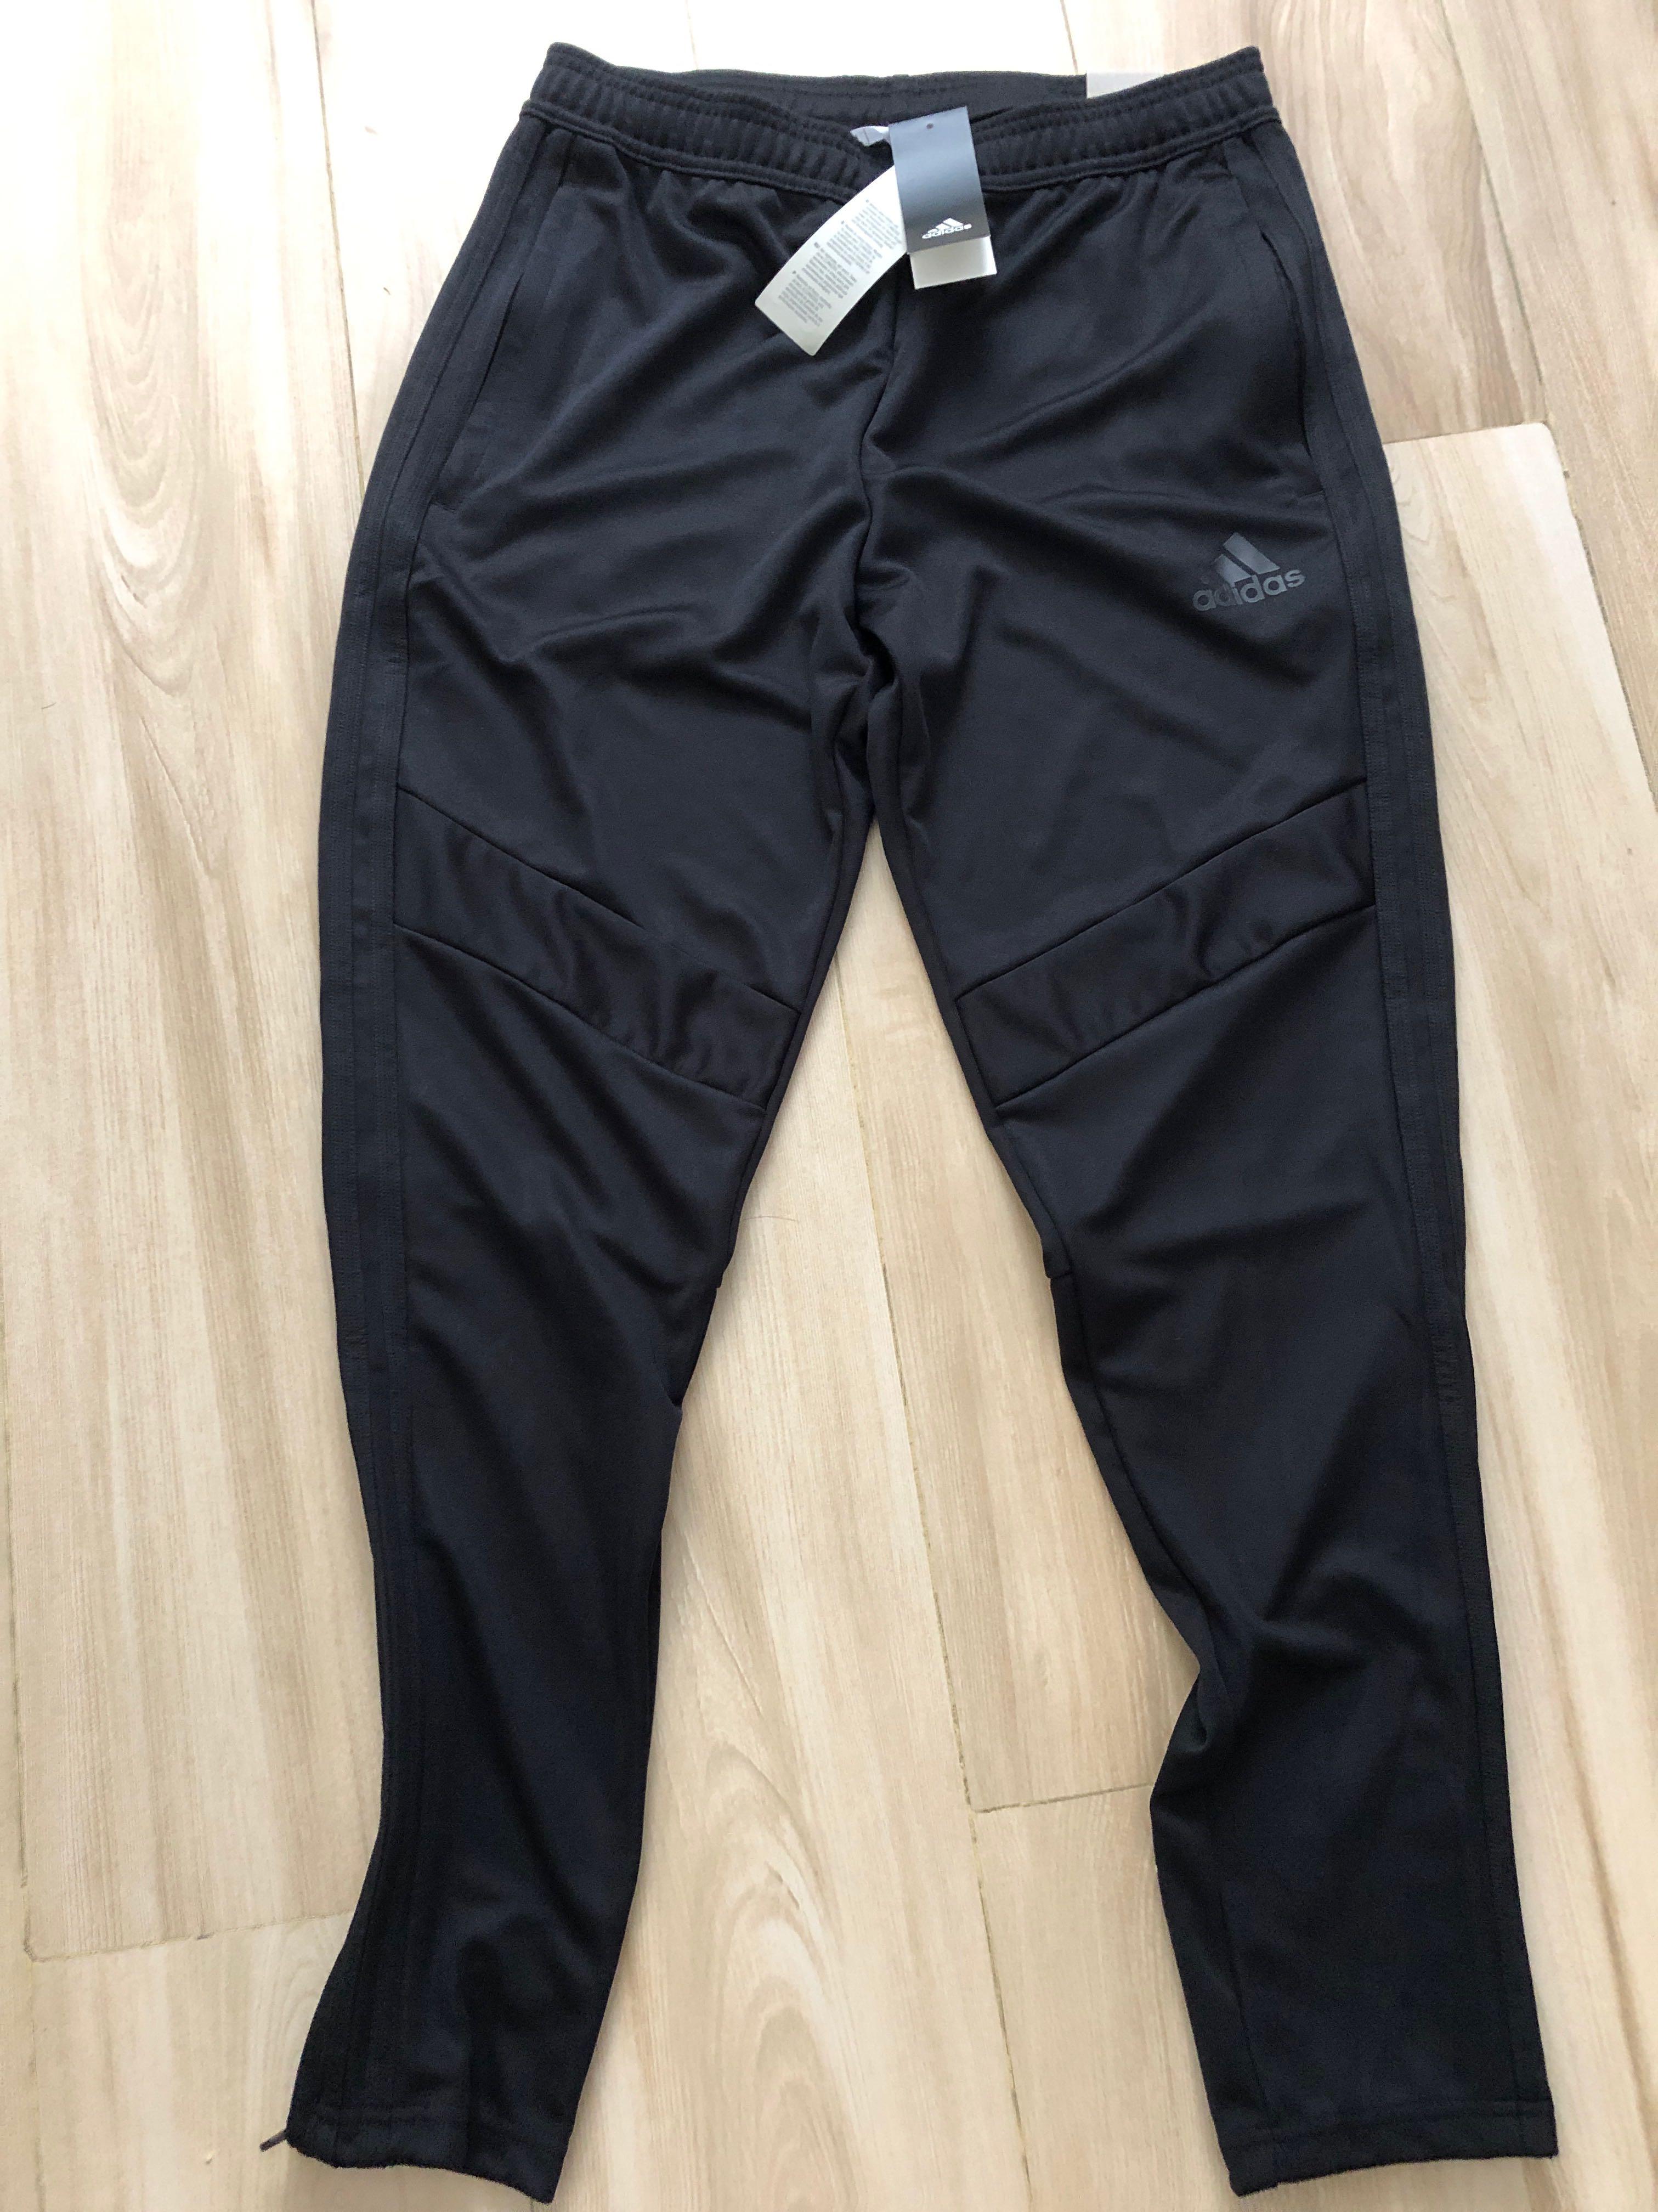 adidas football tapered fit pants